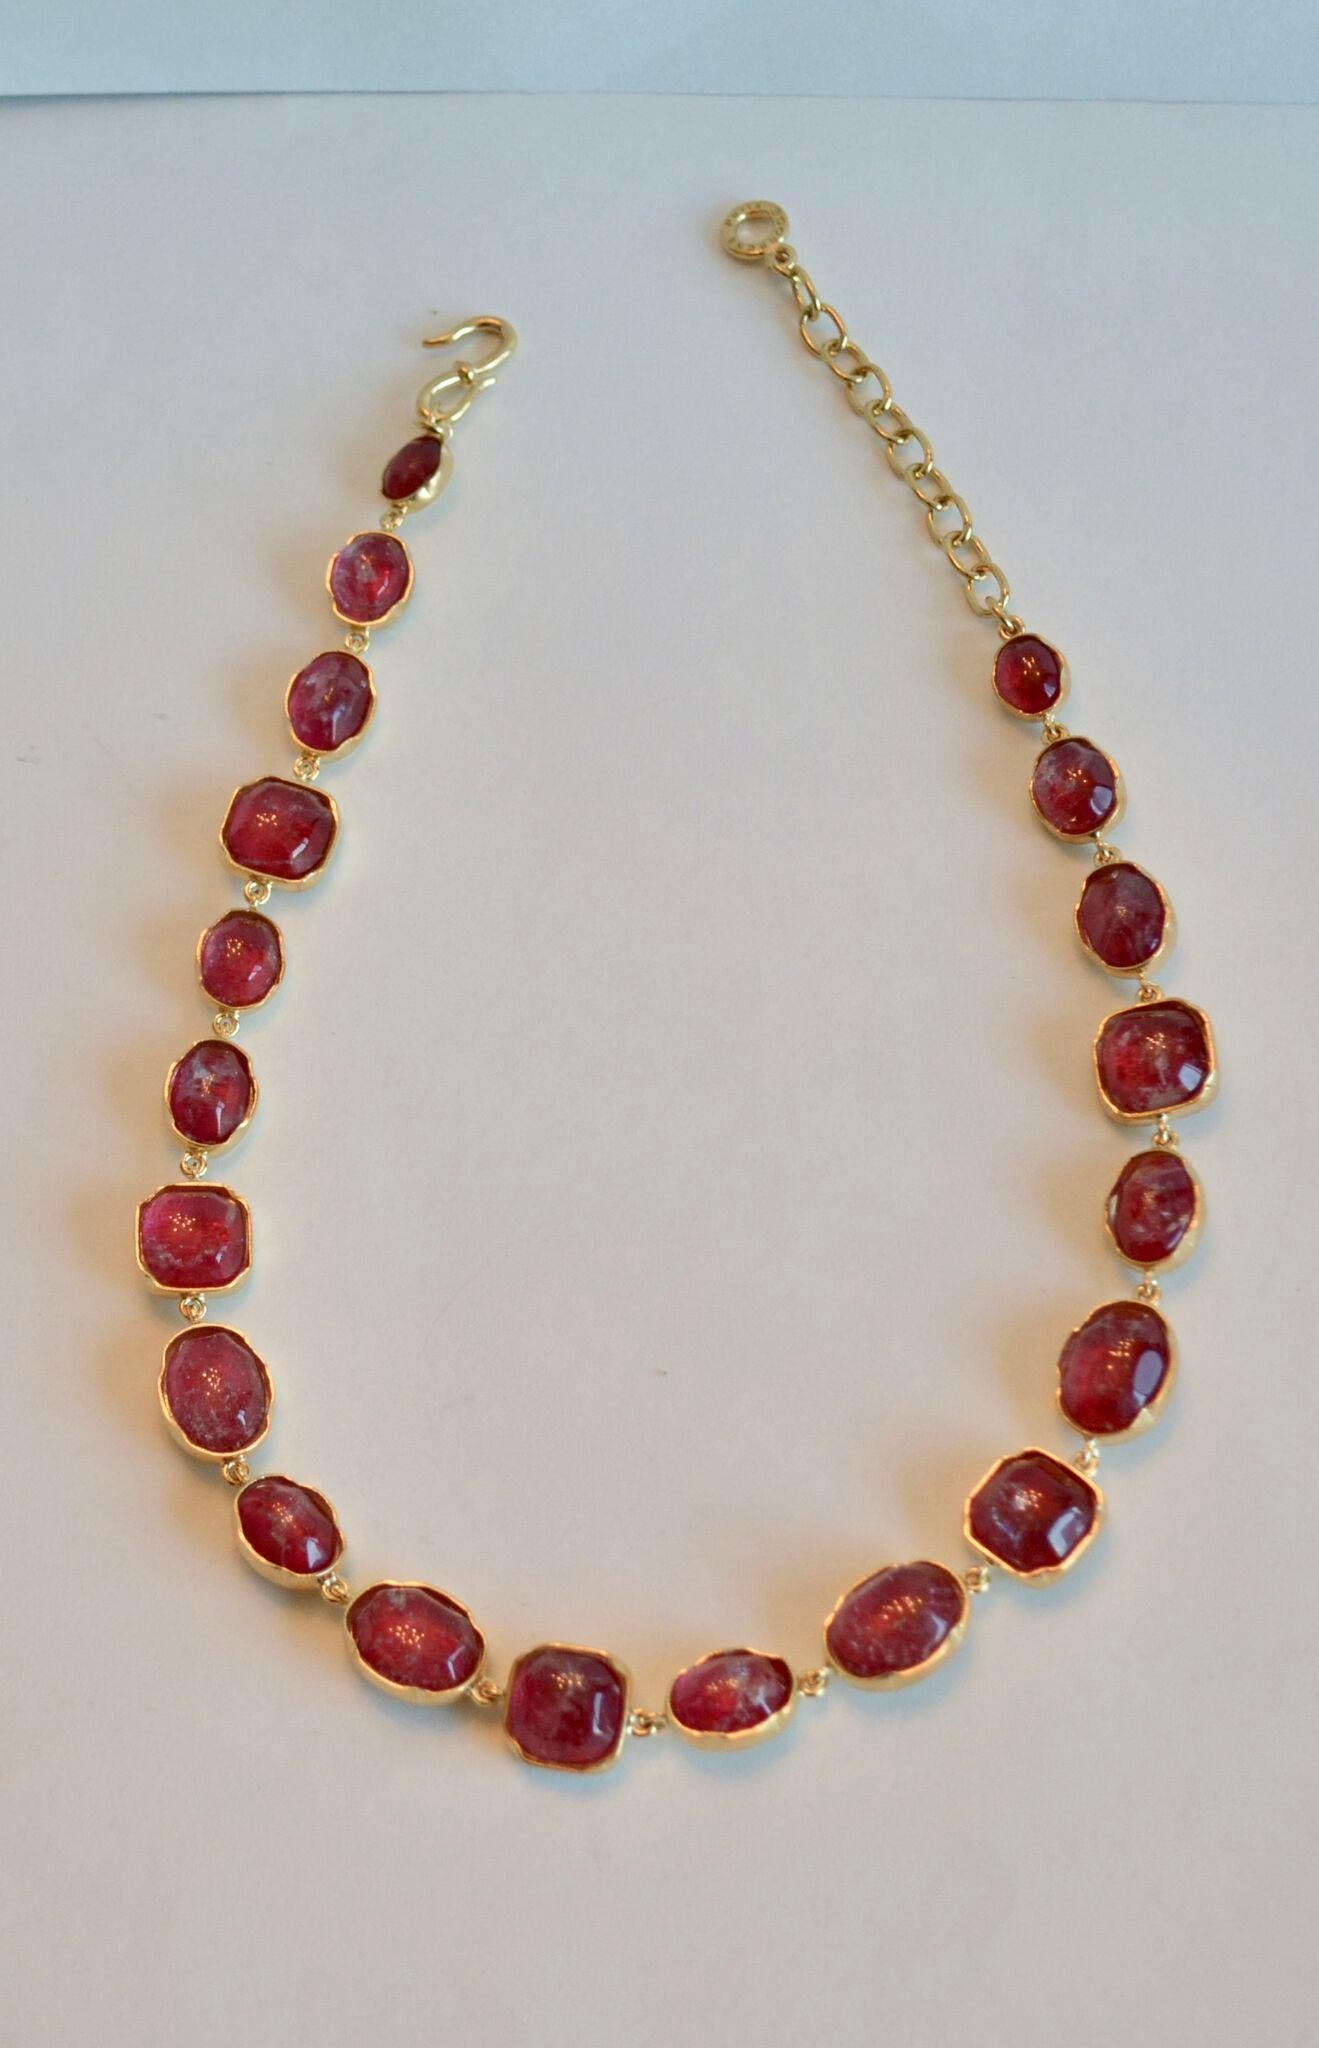 Berry tone rock crystal necklace (hand painted) set in 24k plated brass from Goossens Paris. 